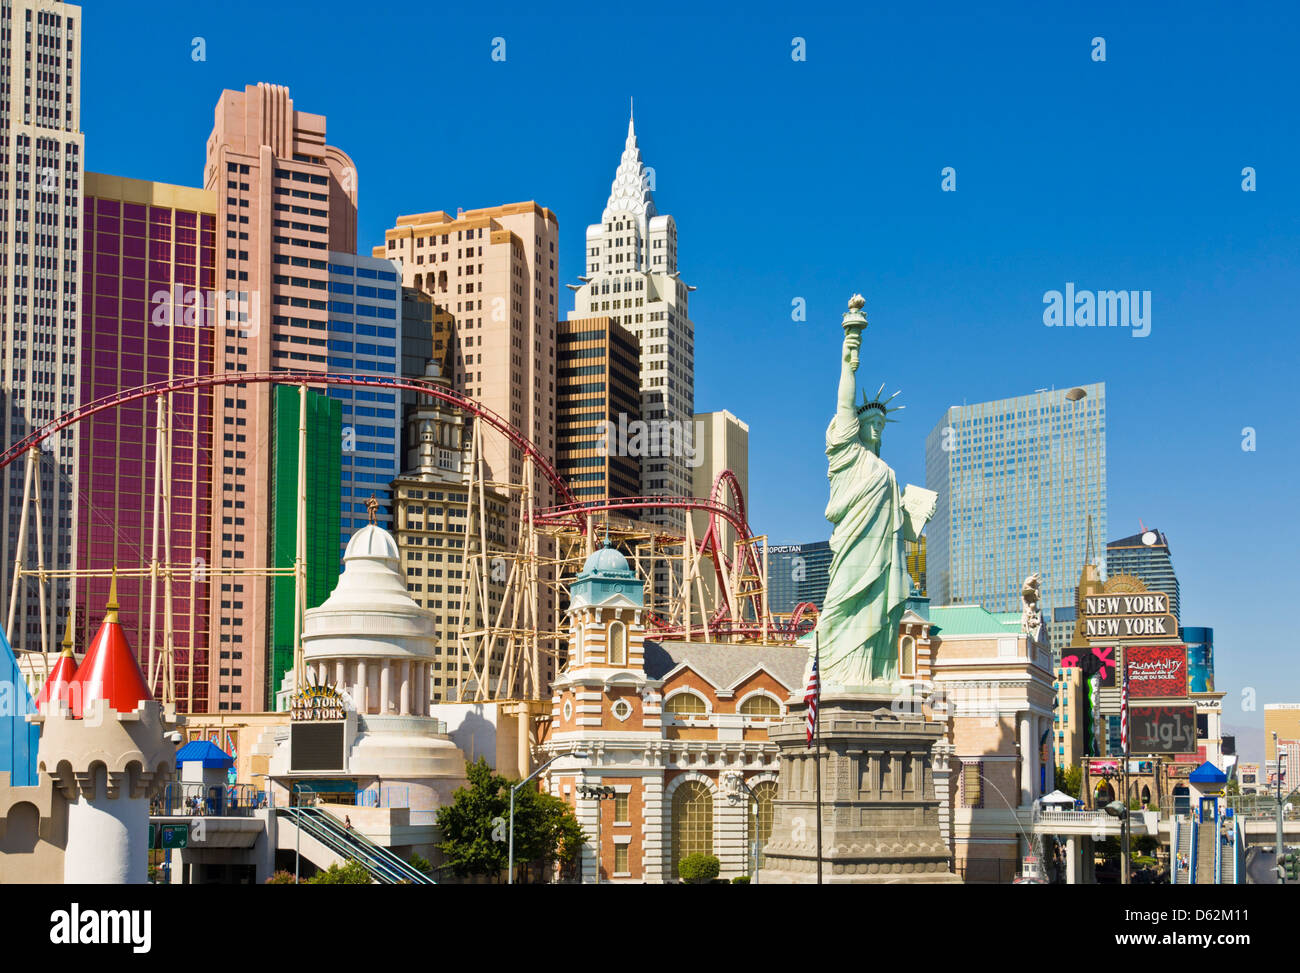 New York-New York hotel with roller coaster, The Strip, Las Vegas Boulevard  South, Las Vegas, Nevada, United States of America, North America - Stock  Photo - Masterfile - Rights-Managed, Artist: robertharding, Code